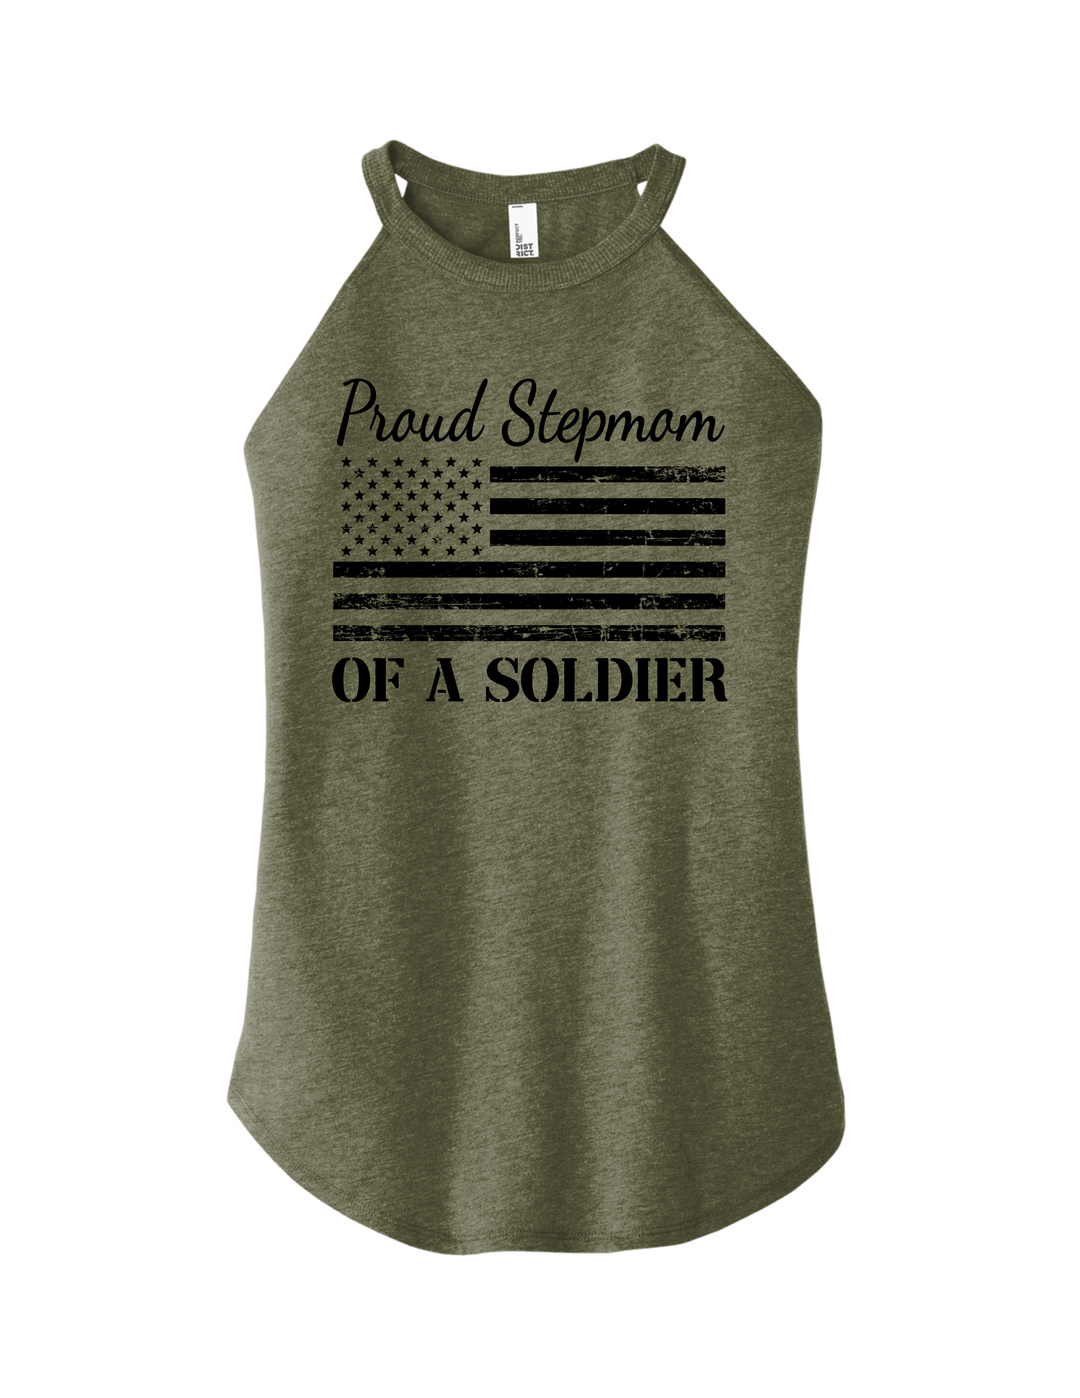 Proud Stepmom of a Soldier Tank (Green)